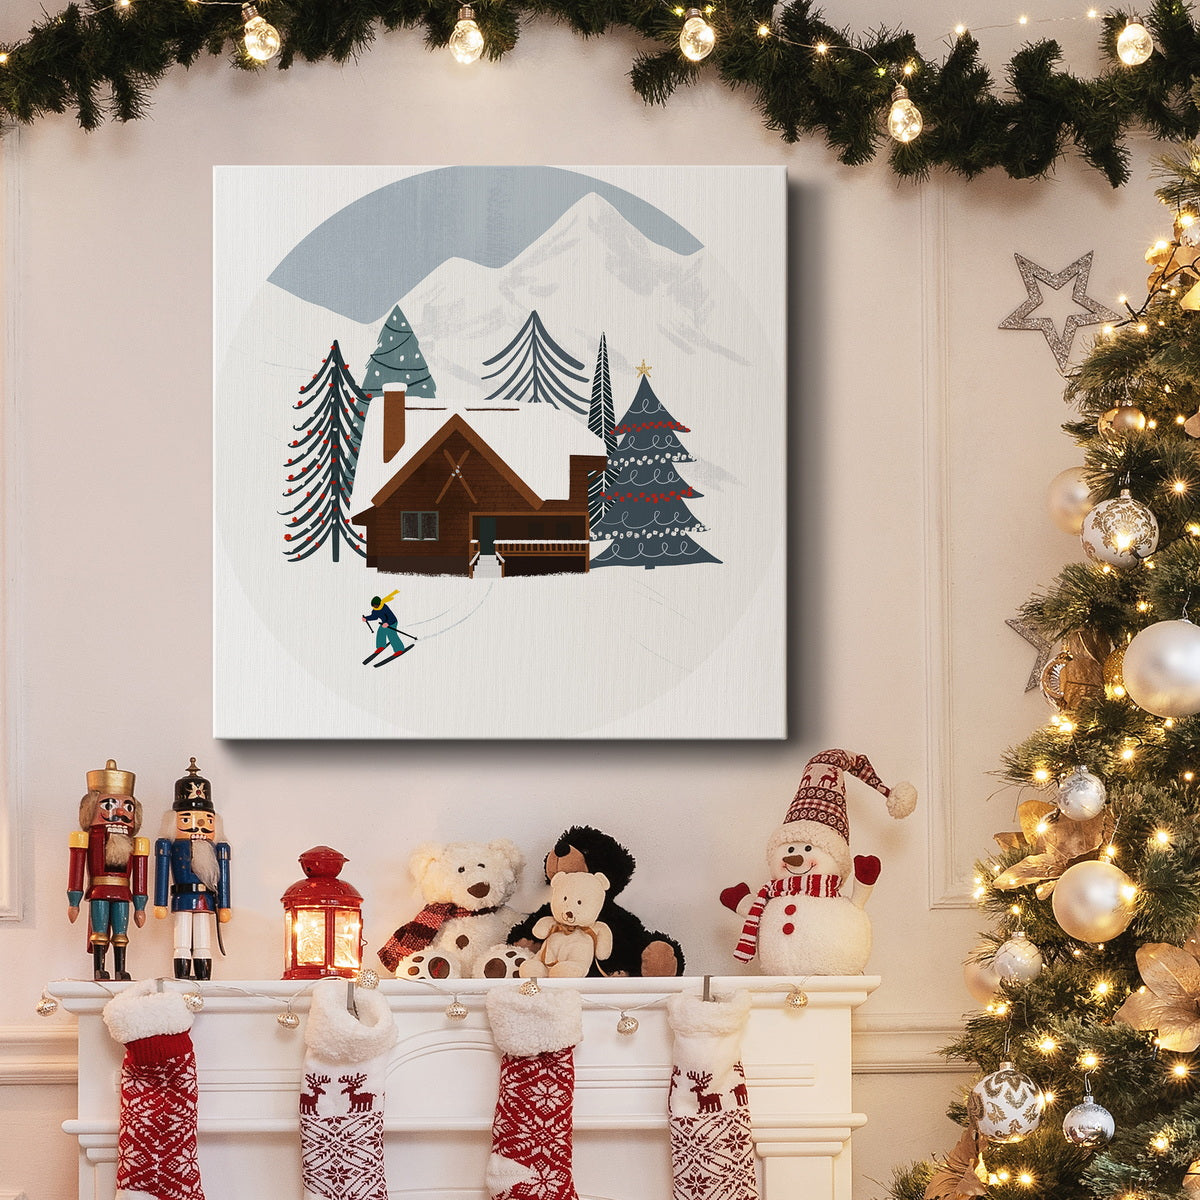 Ski Slope Collection C-Premium Gallery Wrapped Canvas - Ready to Hang